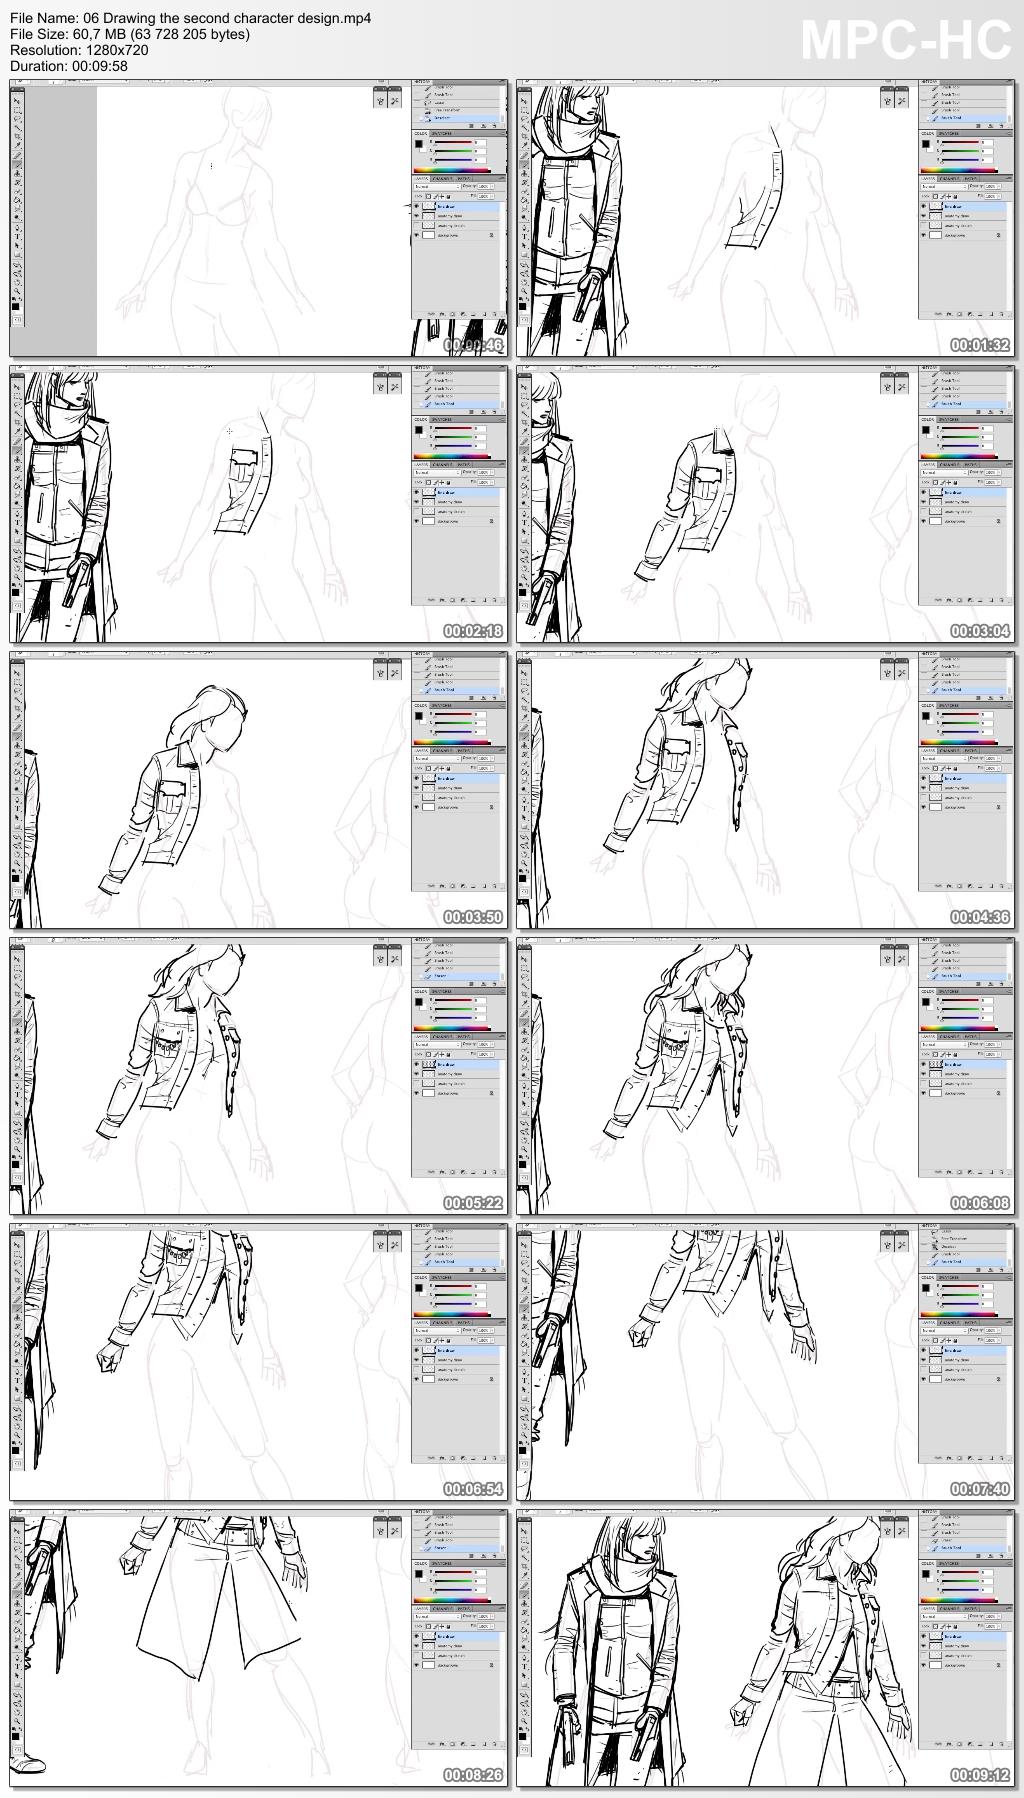 Dixxl Tuxxs - Creating Female Character Thumbnails in Photoshop